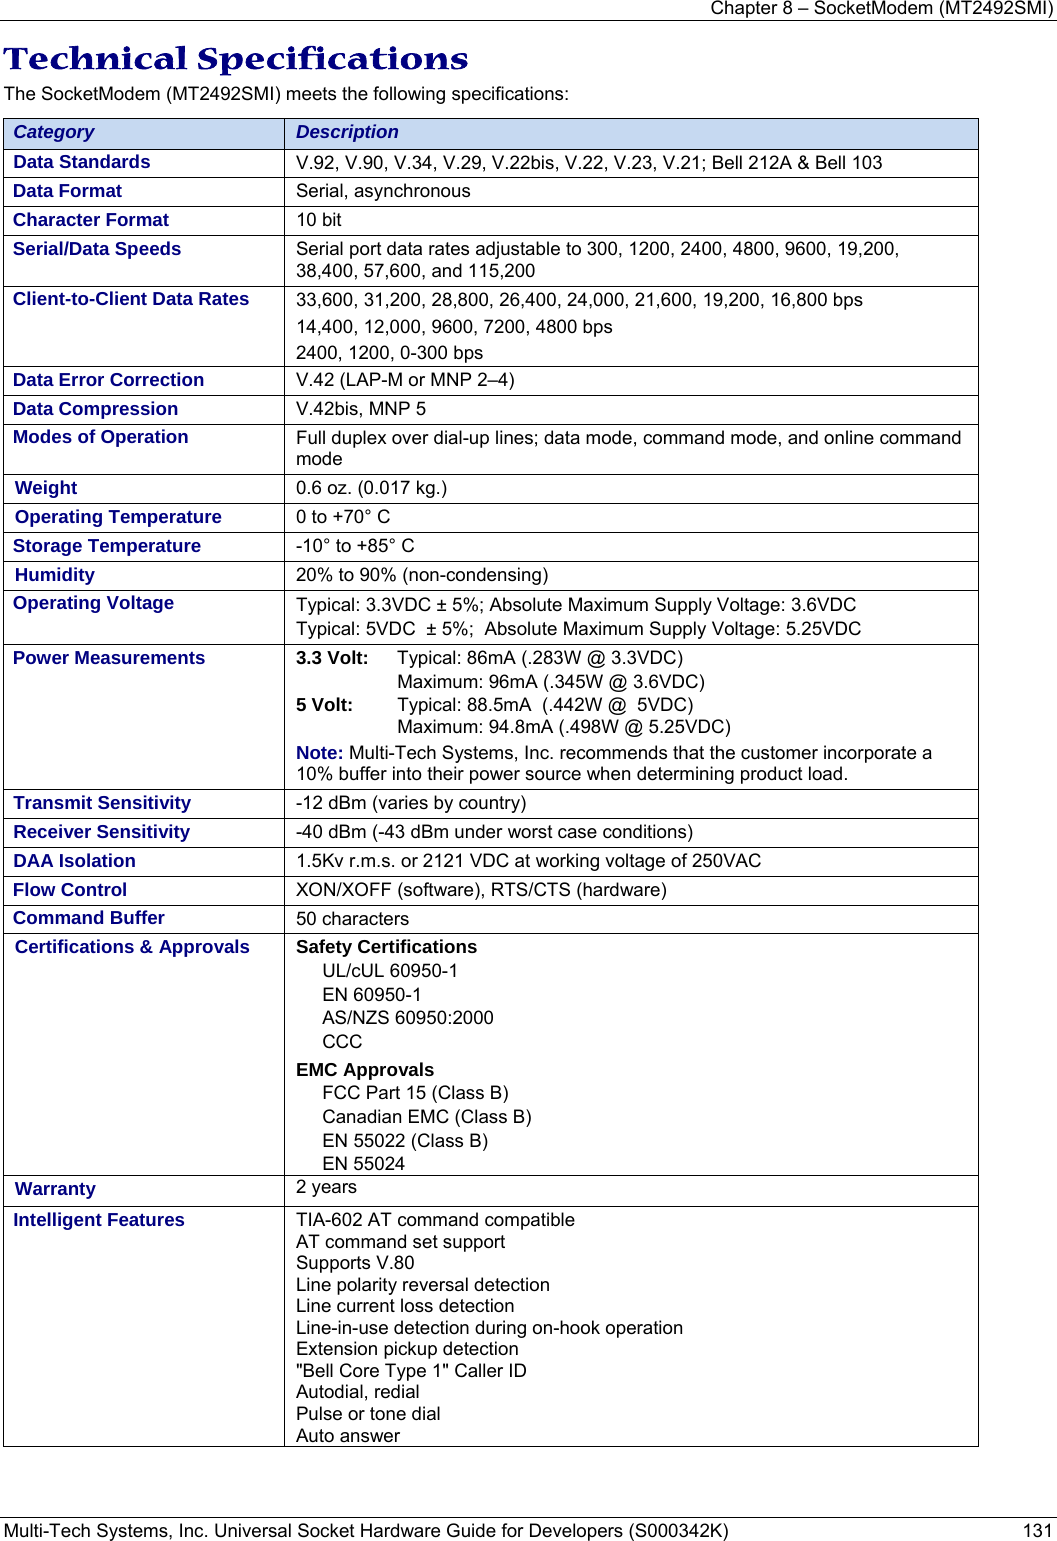 Chapter 8 – SocketModem (MT2492SMI) Multi-Tech Systems, Inc. Universal Socket Hardware Guide for Developers (S000342K)  131  Technical Specifications The SocketModem (MT2492SMI) meets the following specifications:  Category  Description Data Standards  V.92, V.90, V.34, V.29, V.22bis, V.22, V.23, V.21; Bell 212A &amp; Bell 103  Data Format  Serial, asynchronous Character Format  10 bit Serial/Data Speeds   Serial port data rates adjustable to 300, 1200, 2400, 4800, 9600, 19,200, 38,400, 57,600, and 115,200 Client-to-Client Data Rates  33,600, 31,200, 28,800, 26,400, 24,000, 21,600, 19,200, 16,800 bps 14,400, 12,000, 9600, 7200, 4800 bps 2400, 1200, 0-300 bps Data Error Correction  V.42 (LAP-M or MNP 2–4) Data Compression  V.42bis, MNP 5 Modes of Operation  Full duplex over dial-up lines; data mode, command mode, and online command mode Weight  0.6 oz. (0.017 kg.)  Operating Temperature   0 to +70° C   Storage Temperature  -10° to +85° C Humidity  20% to 90% (non-condensing)   Operating Voltage  Typical: 3.3VDC ± 5%; Absolute Maximum Supply Voltage: 3.6VDC Typical: 5VDC  ± 5%;  Absolute Maximum Supply Voltage: 5.25VDC Power Measurements   3.3 Volt:   Typical: 86mA (.283W @ 3.3VDC)    Maximum: 96mA (.345W @ 3.6VDC) 5 Volt:  Typical: 88.5mA  (.442W @  5VDC)    Maximum: 94.8mA (.498W @ 5.25VDC) Note: Multi-Tech Systems, Inc. recommends that the customer incorporate a 10% buffer into their power source when determining product load. Transmit Sensitivity  -12 dBm (varies by country) Receiver Sensitivity  -40 dBm (-43 dBm under worst case conditions) DAA Isolation  1.5Kv r.m.s. or 2121 VDC at working voltage of 250VAC Flow Control  XON/XOFF (software), RTS/CTS (hardware) Command Buffer  50 characters Certifications &amp; Approvals  Safety Certifications UL/cUL 60950-1 EN 60950-1 AS/NZS 60950:2000 CCC  EMC Approvals FCC Part 15 (Class B) Canadian EMC (Class B) EN 55022 (Class B) EN 55024 Warranty  2 years Intelligent Features  TIA-602 AT command compatible AT command set support Supports V.80 Line polarity reversal detection Line current loss detection Line-in-use detection during on-hook operation Extension pickup detection &quot;Bell Core Type 1&quot; Caller ID  Autodial, redial Pulse or tone dial Auto answer     